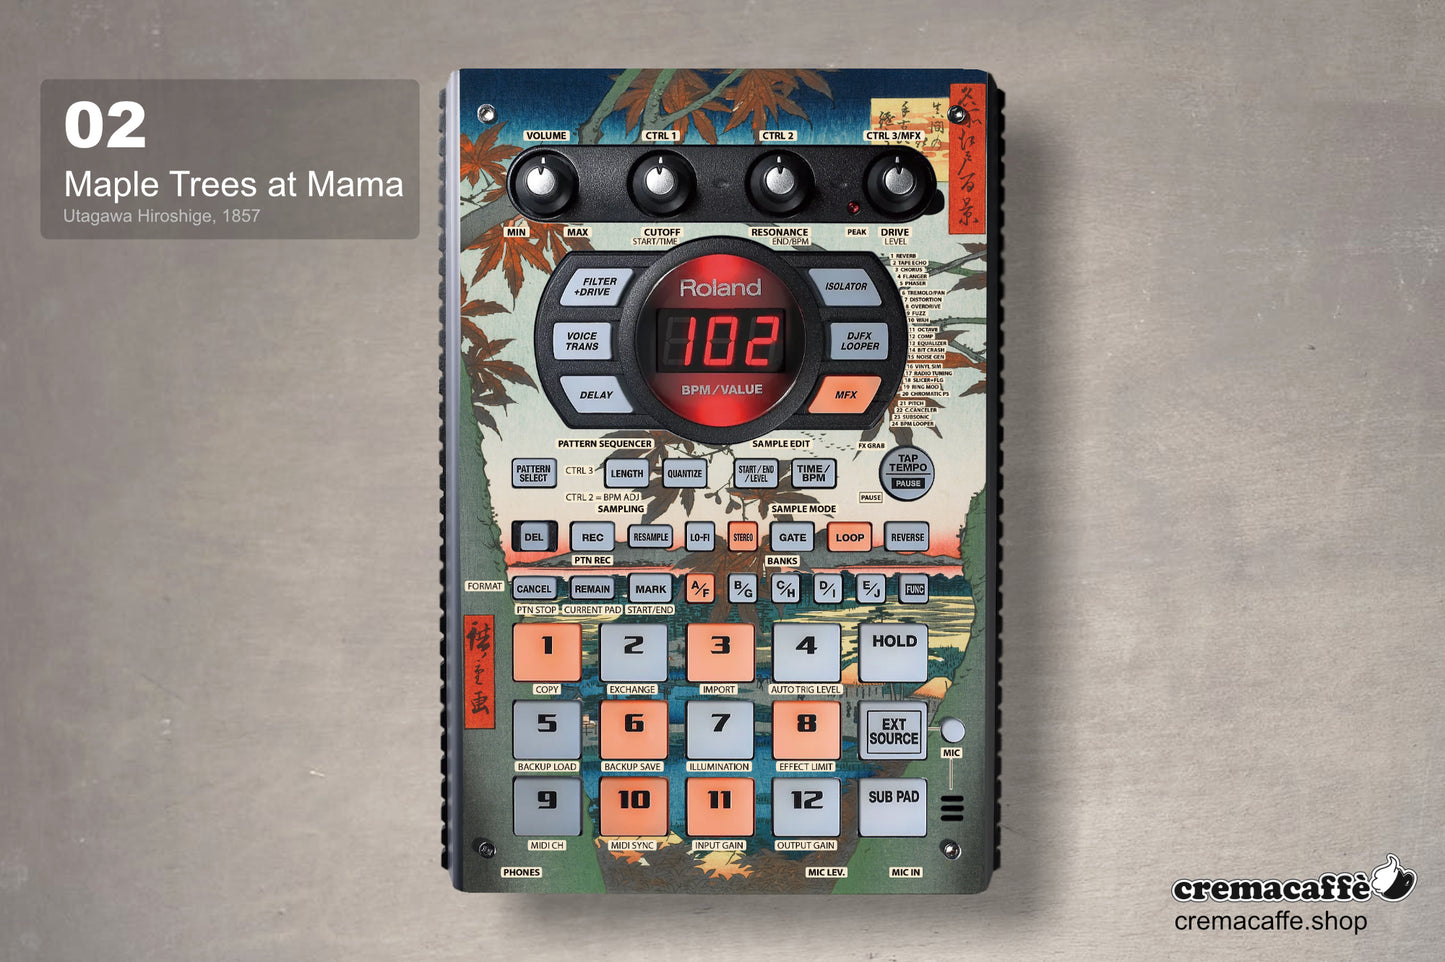 SP-404 SX Skin - Maple Trees at Mama | Cremacaffe Design